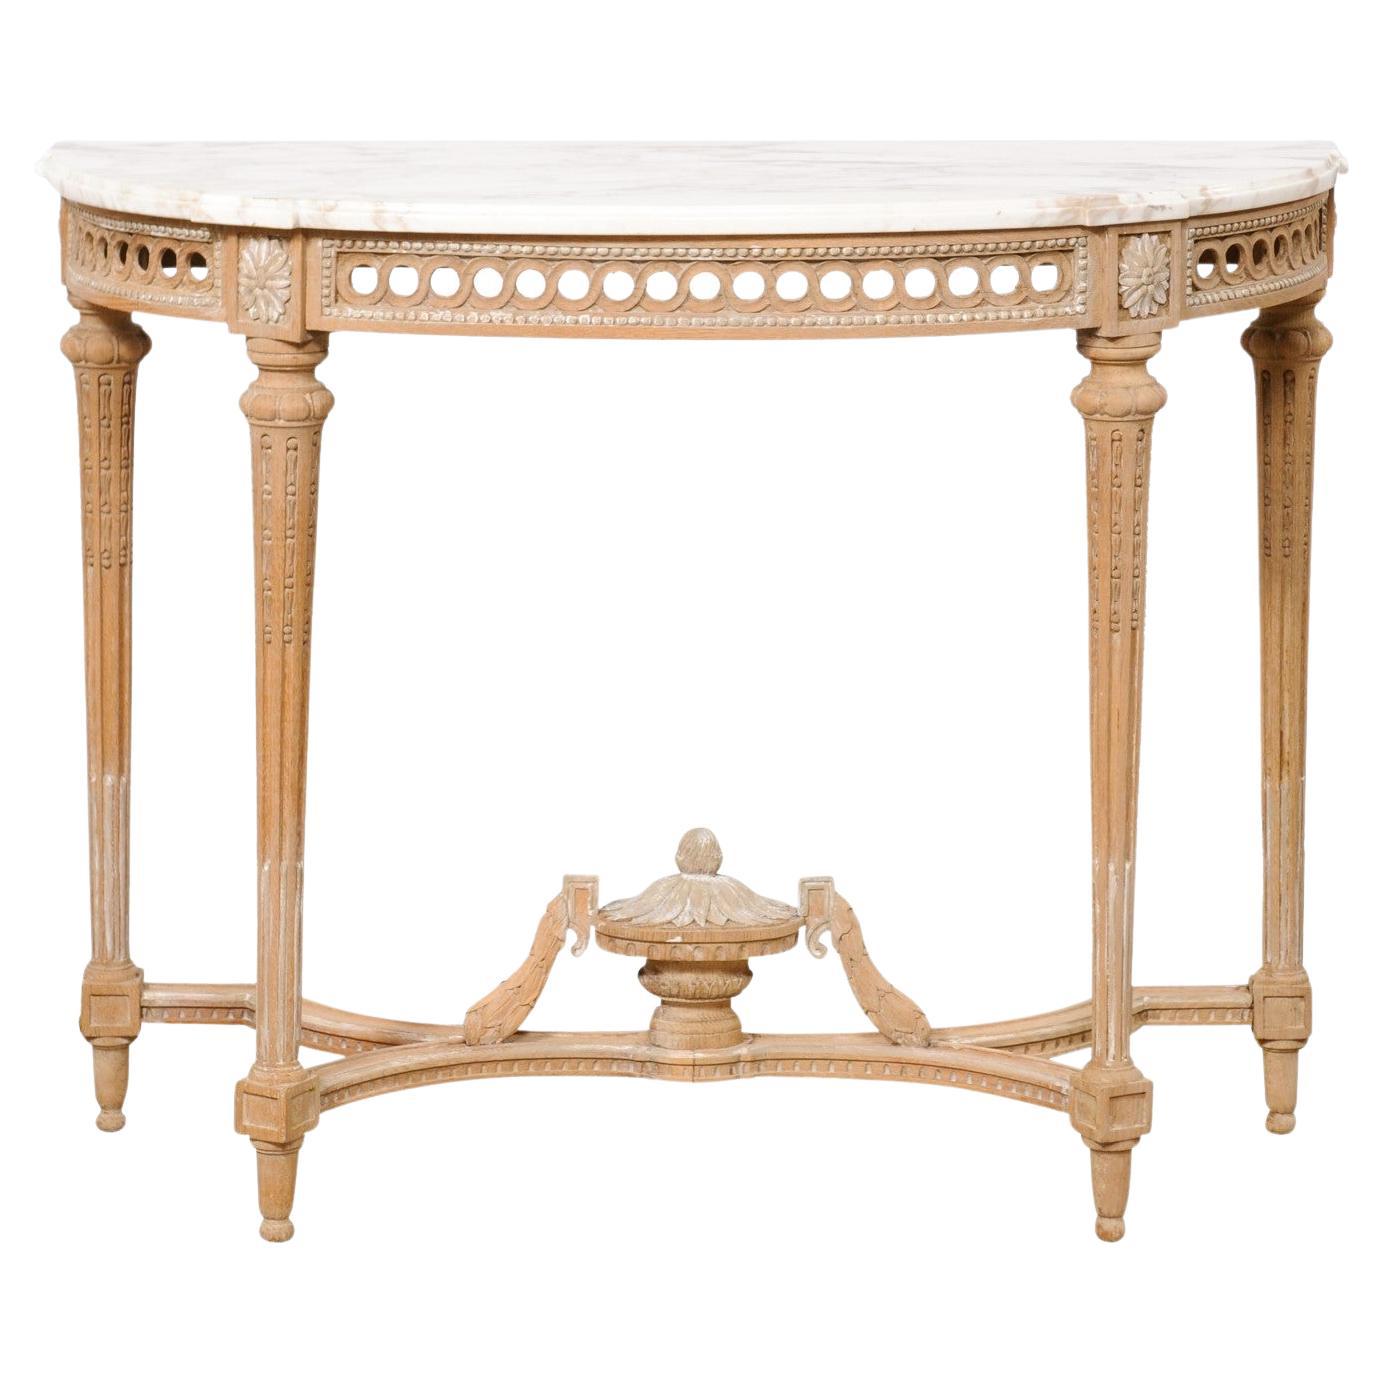 French Neoclassic Style Marble-Top Console Table W/Nice Urn Finial at Underside For Sale